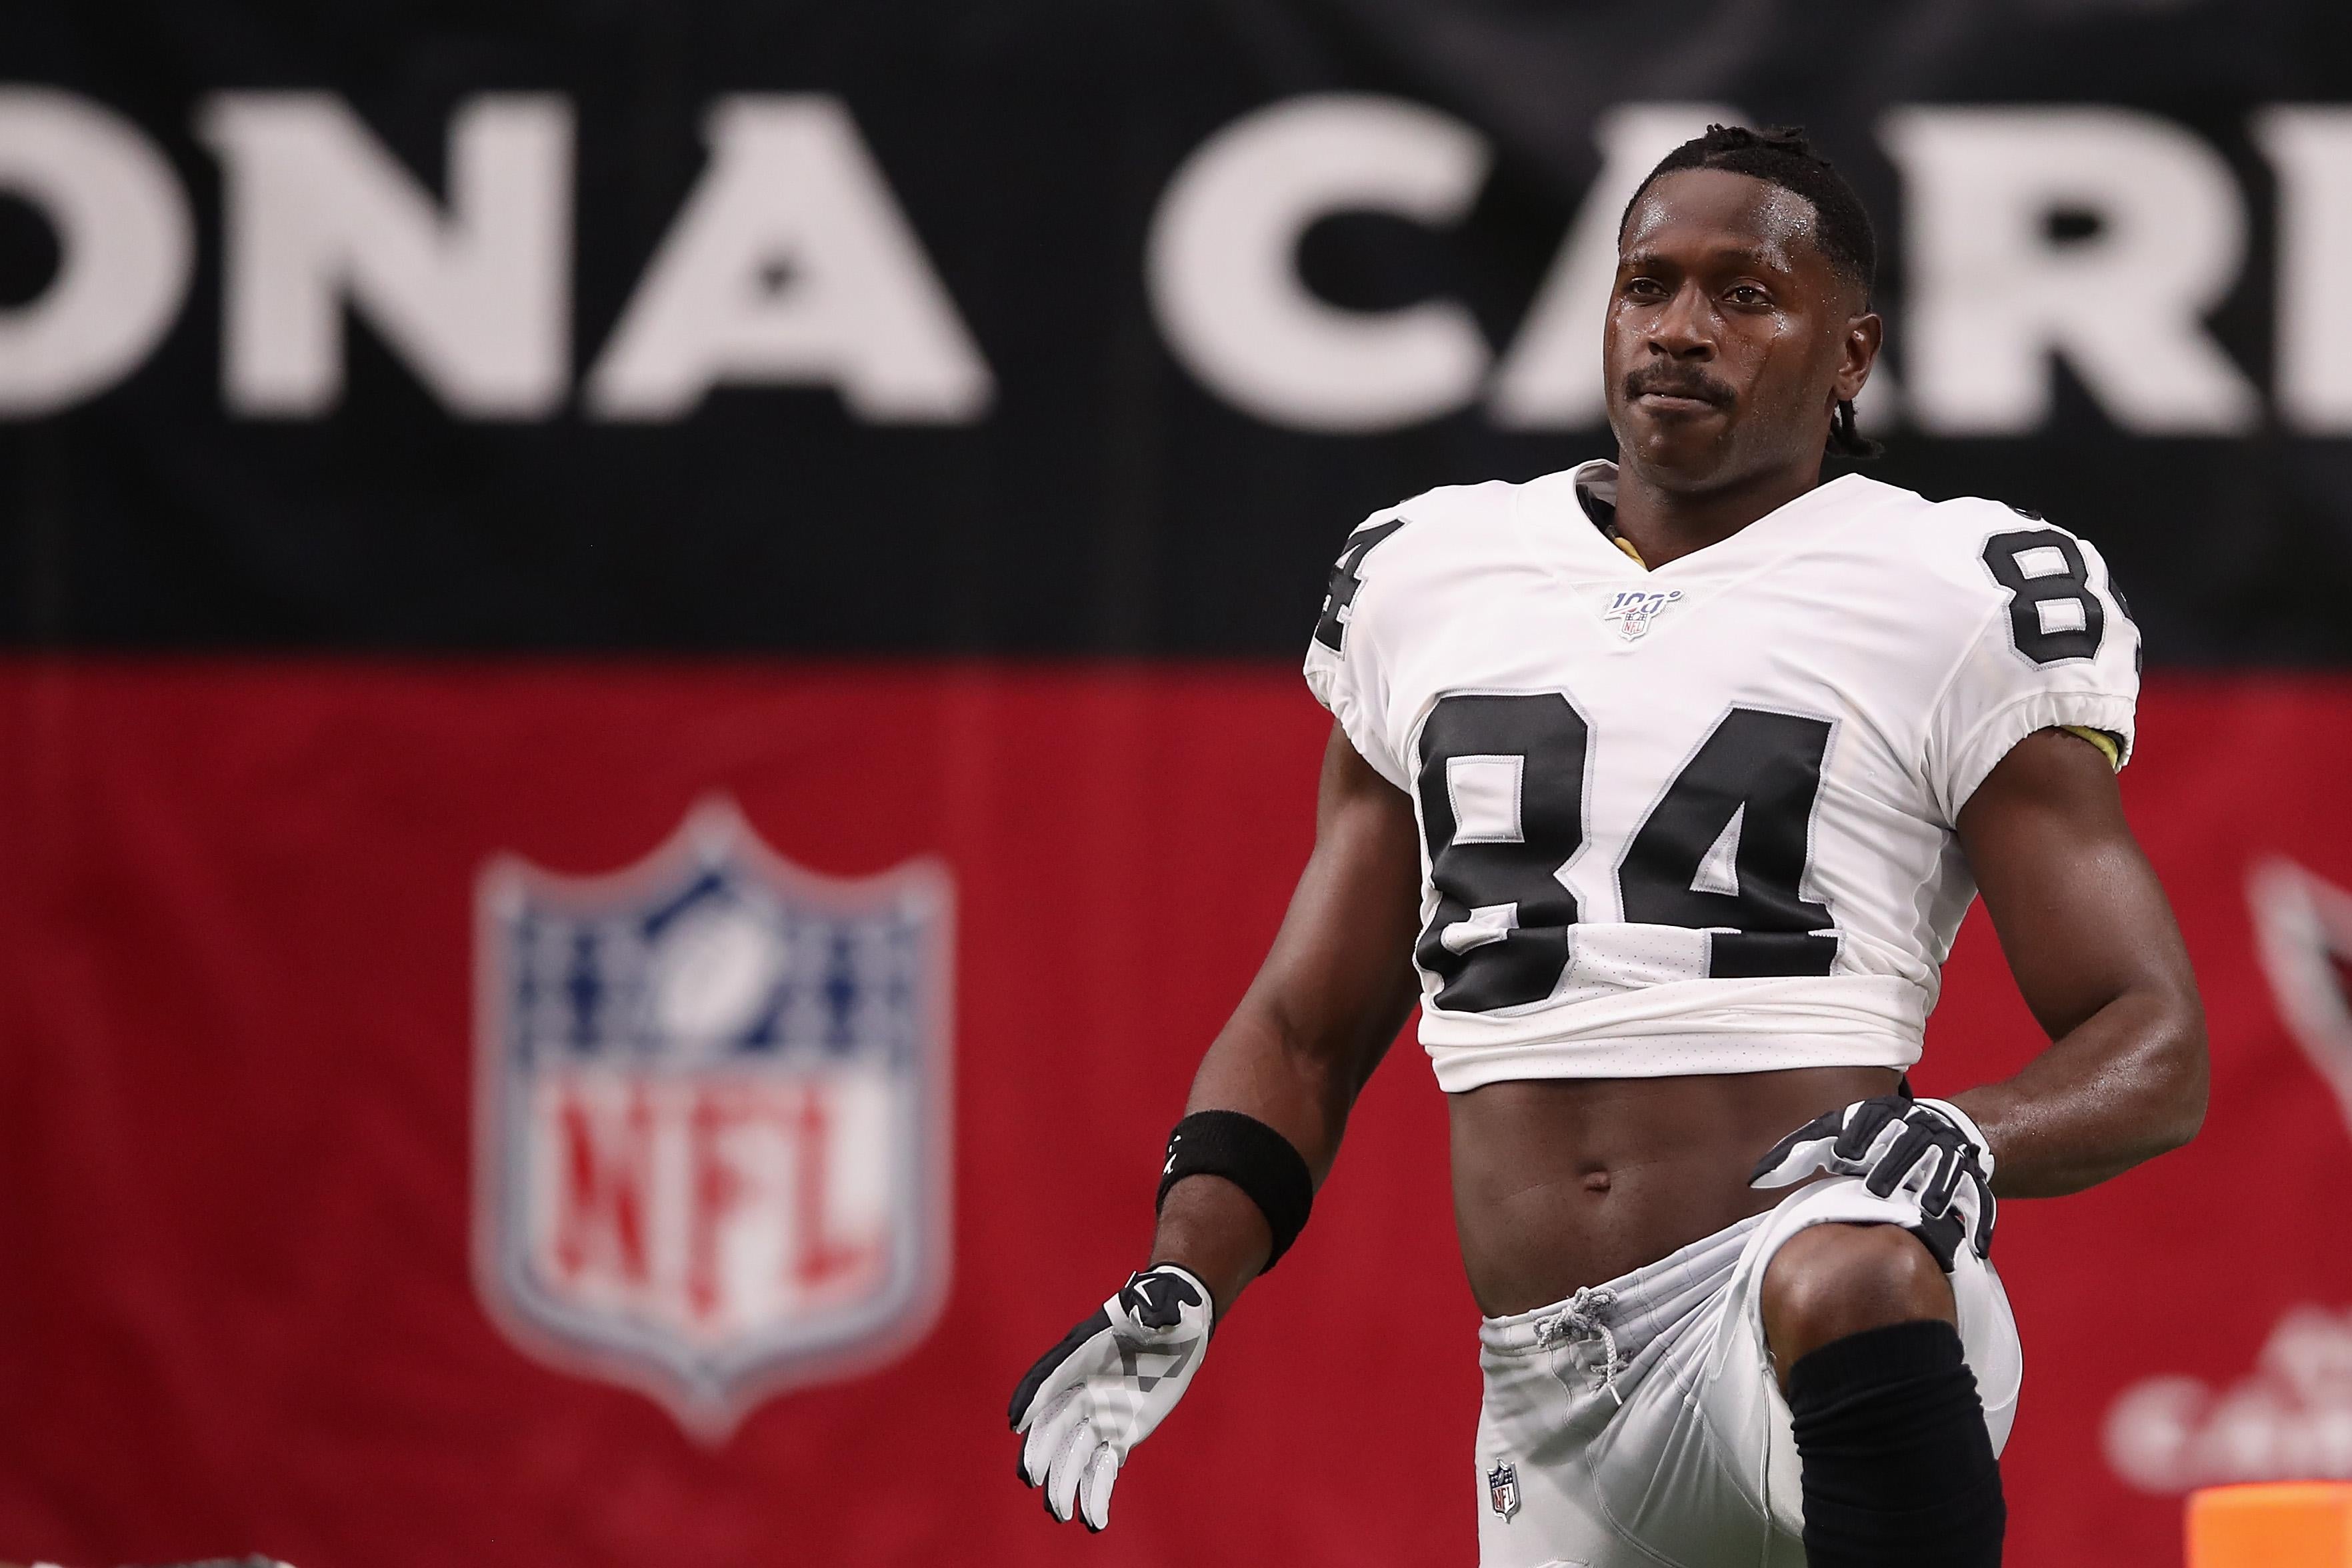 Antonio Brown stretches on field in a Raiders jersey.